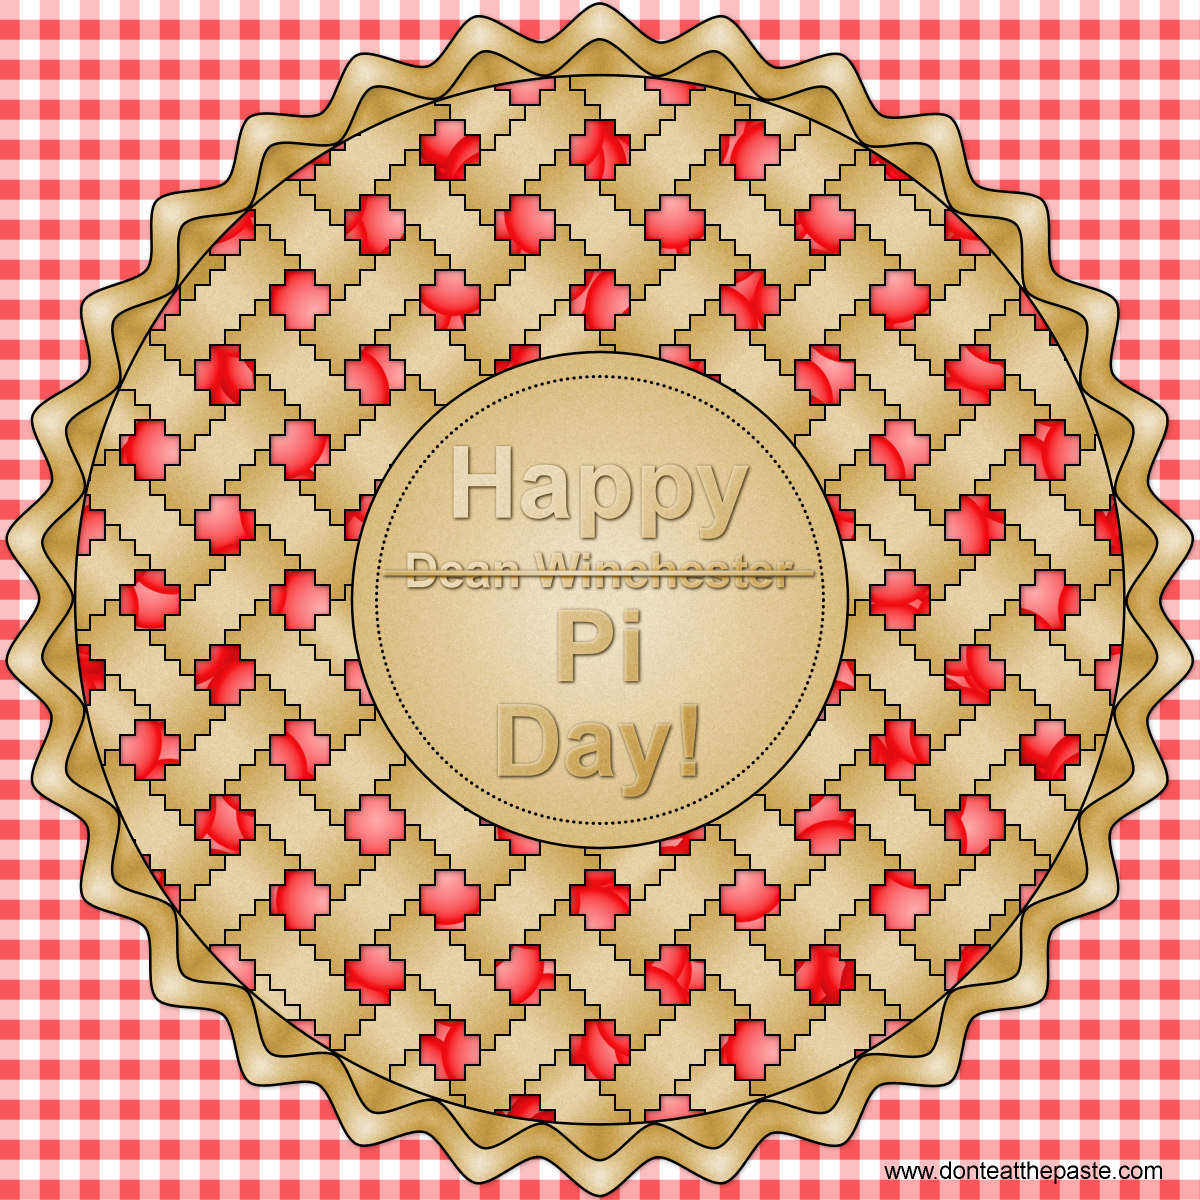 Happy Pi (or Dean Winchester) Day